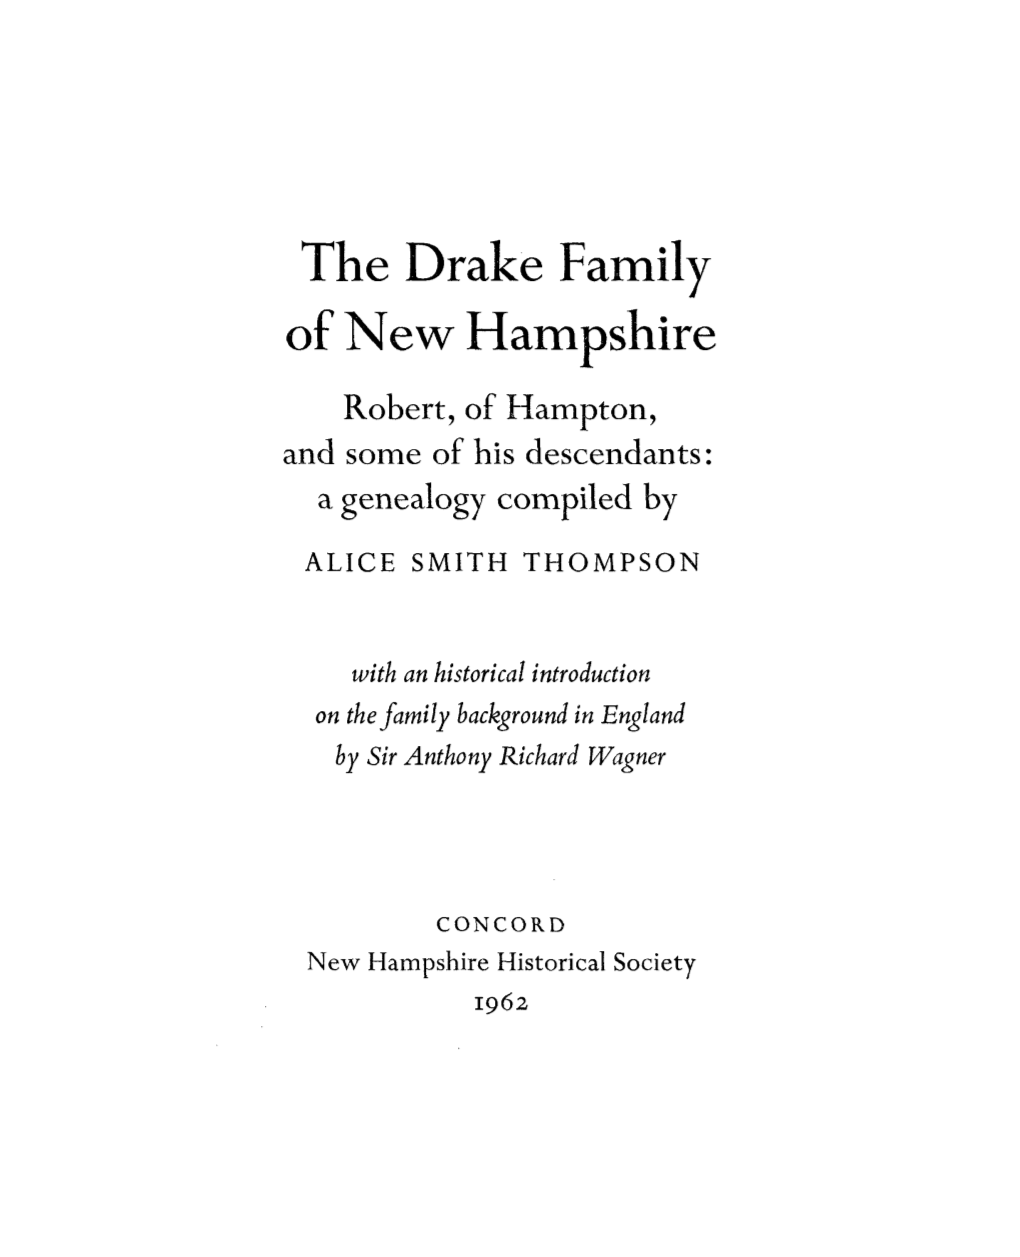 The Drake Family of New Hampshire Robert, of I-Iampton, and Some of His Descendants: a Genealogy Compiled By